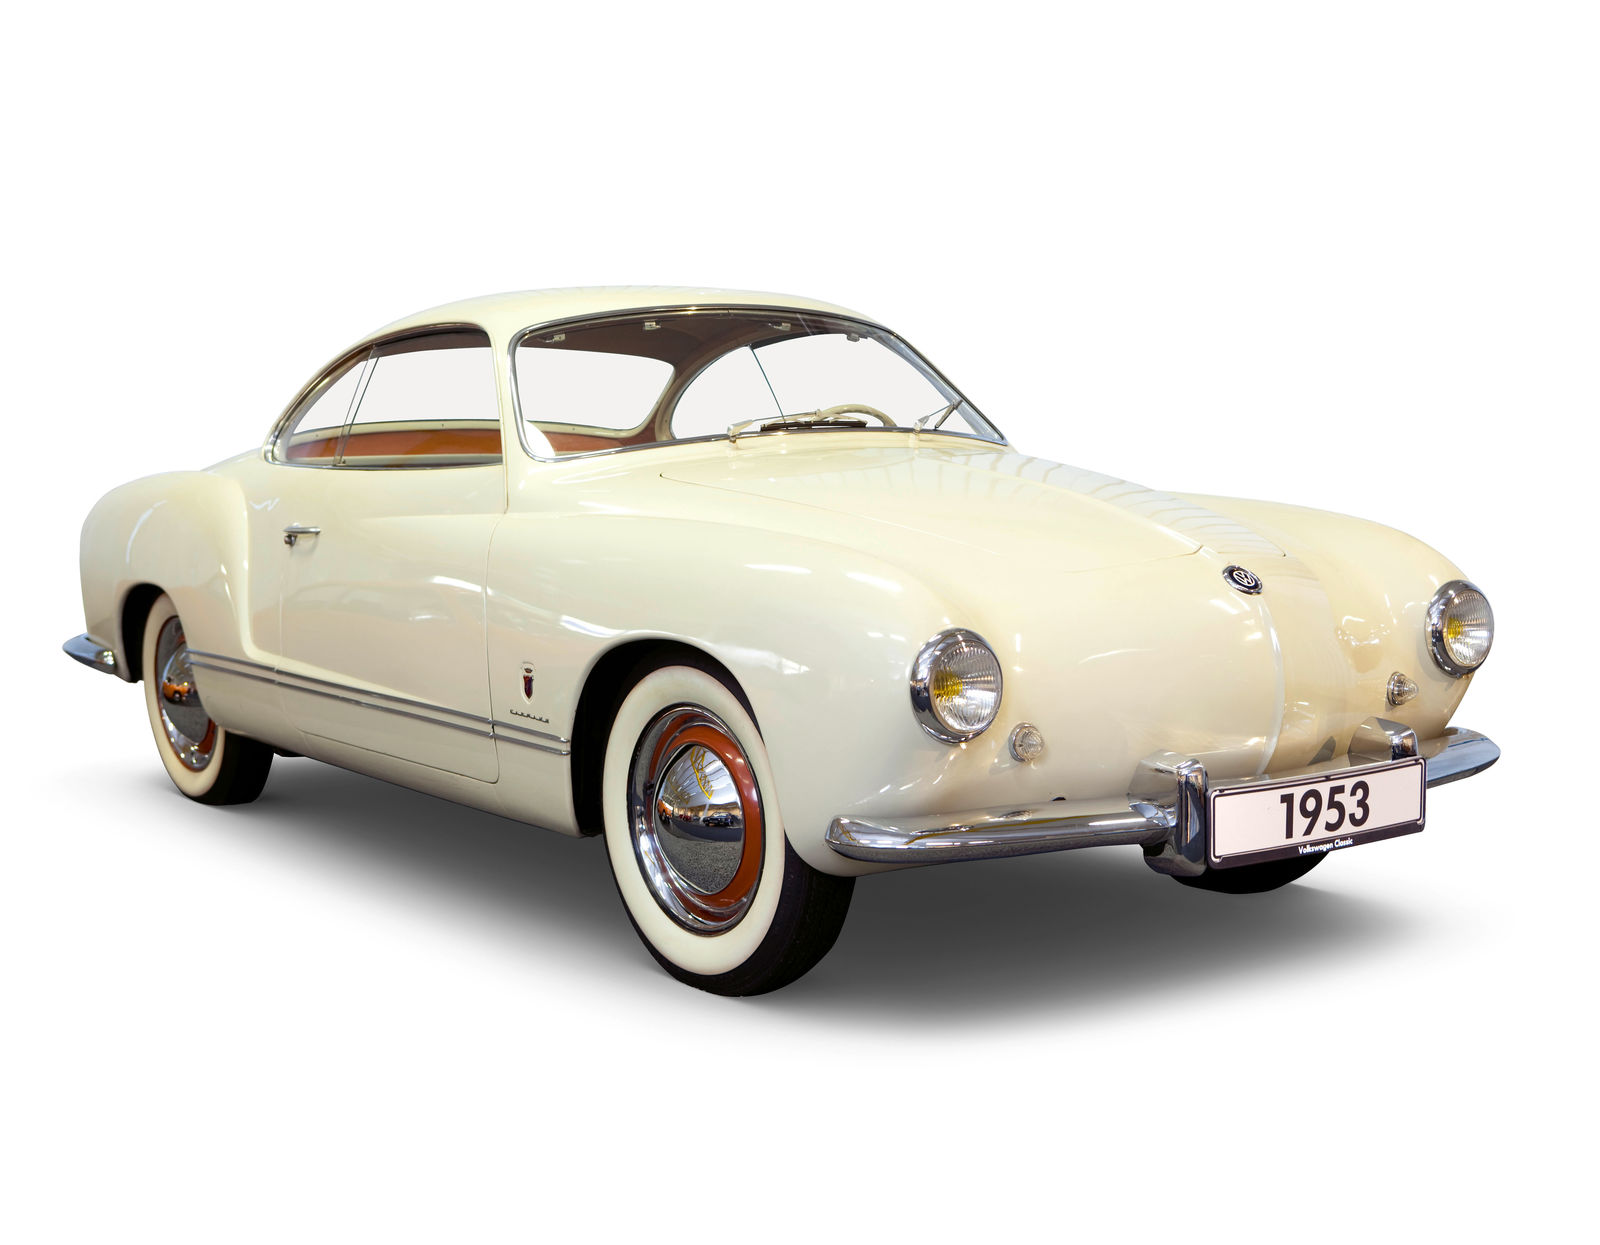 Italian elegance on a Beetle base: a prototype of the Volkswagen Karmann Ghia Coupé from 1953